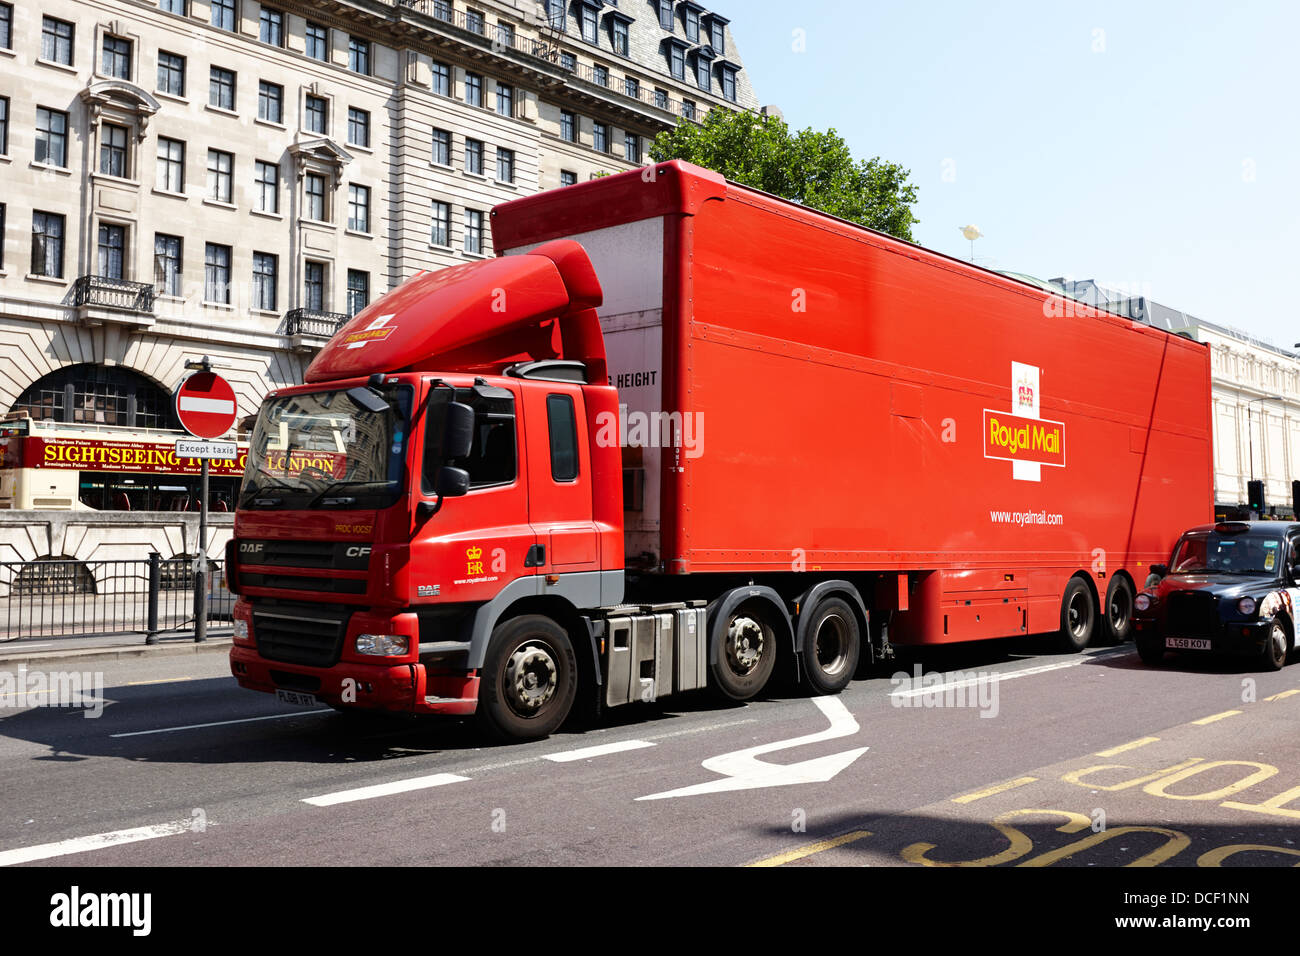 royal mail road transport articulated lorry carrying mail through the roads of London England UK Stock Photo